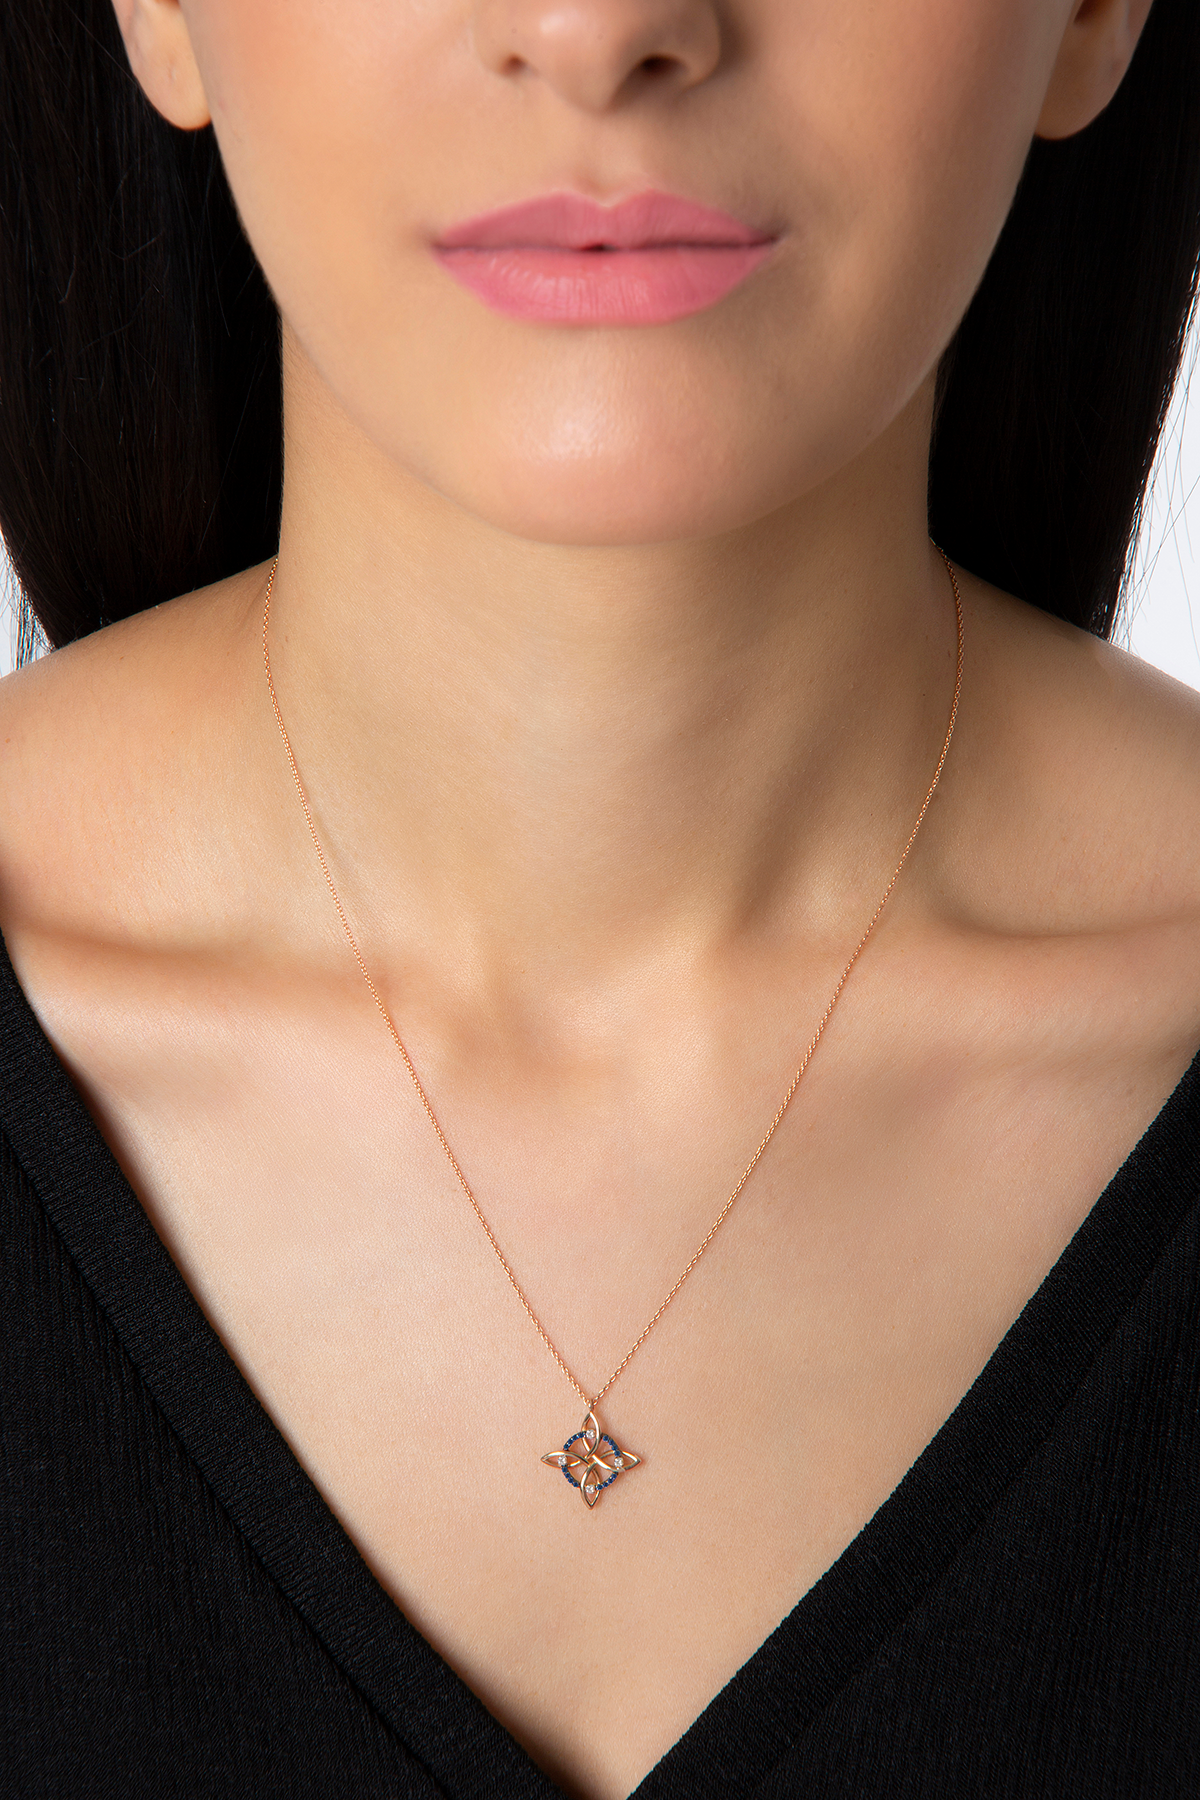 Magic Knot Necklace in Rose Gold - Her Story Shop